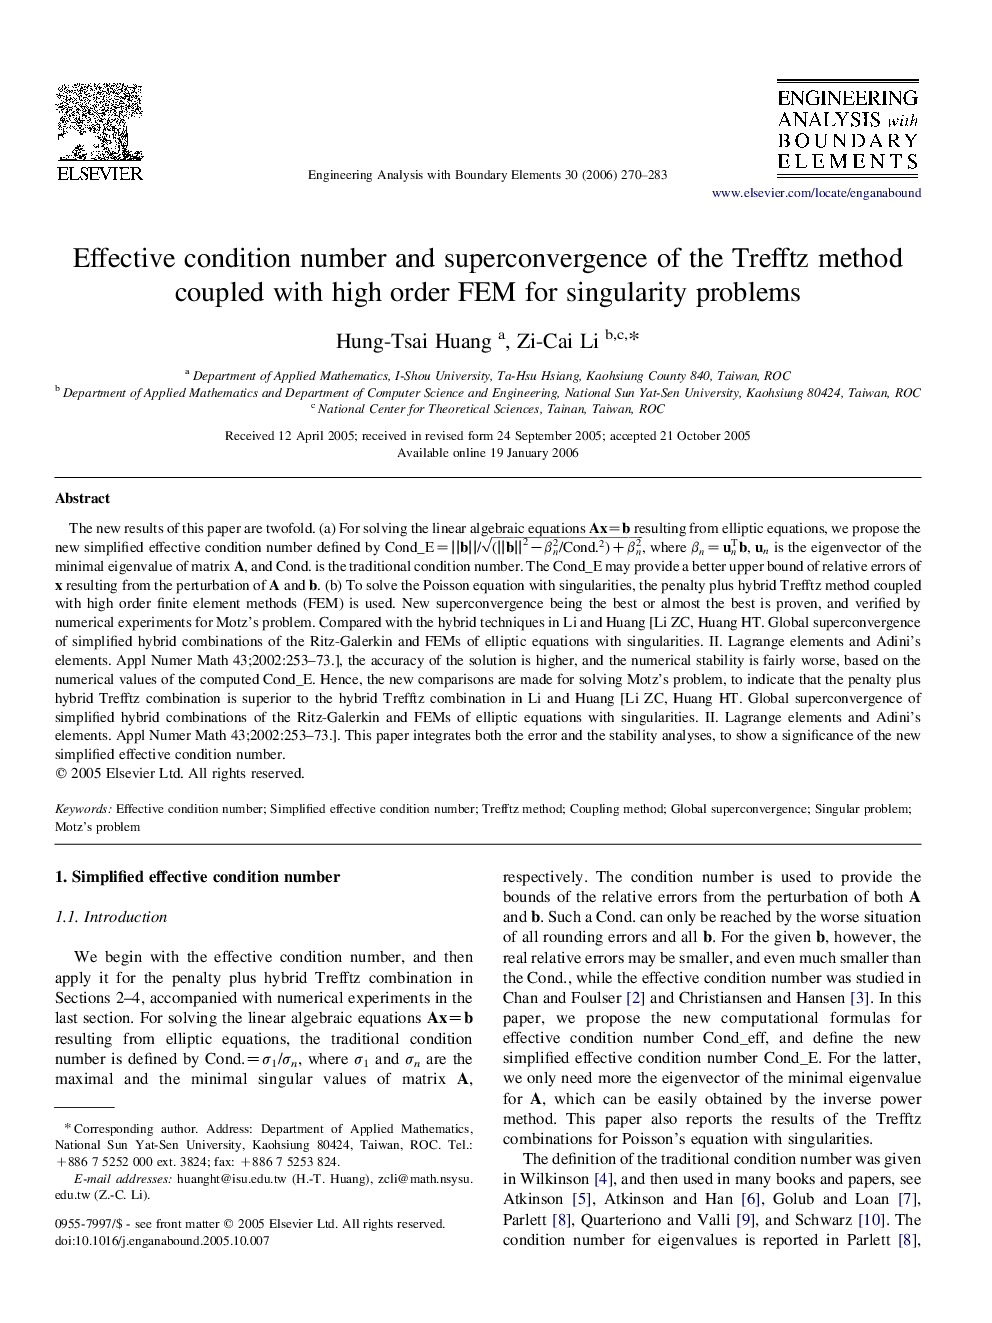 Effective condition number and superconvergence of the Trefftz method coupled with high order FEM for singularity problems